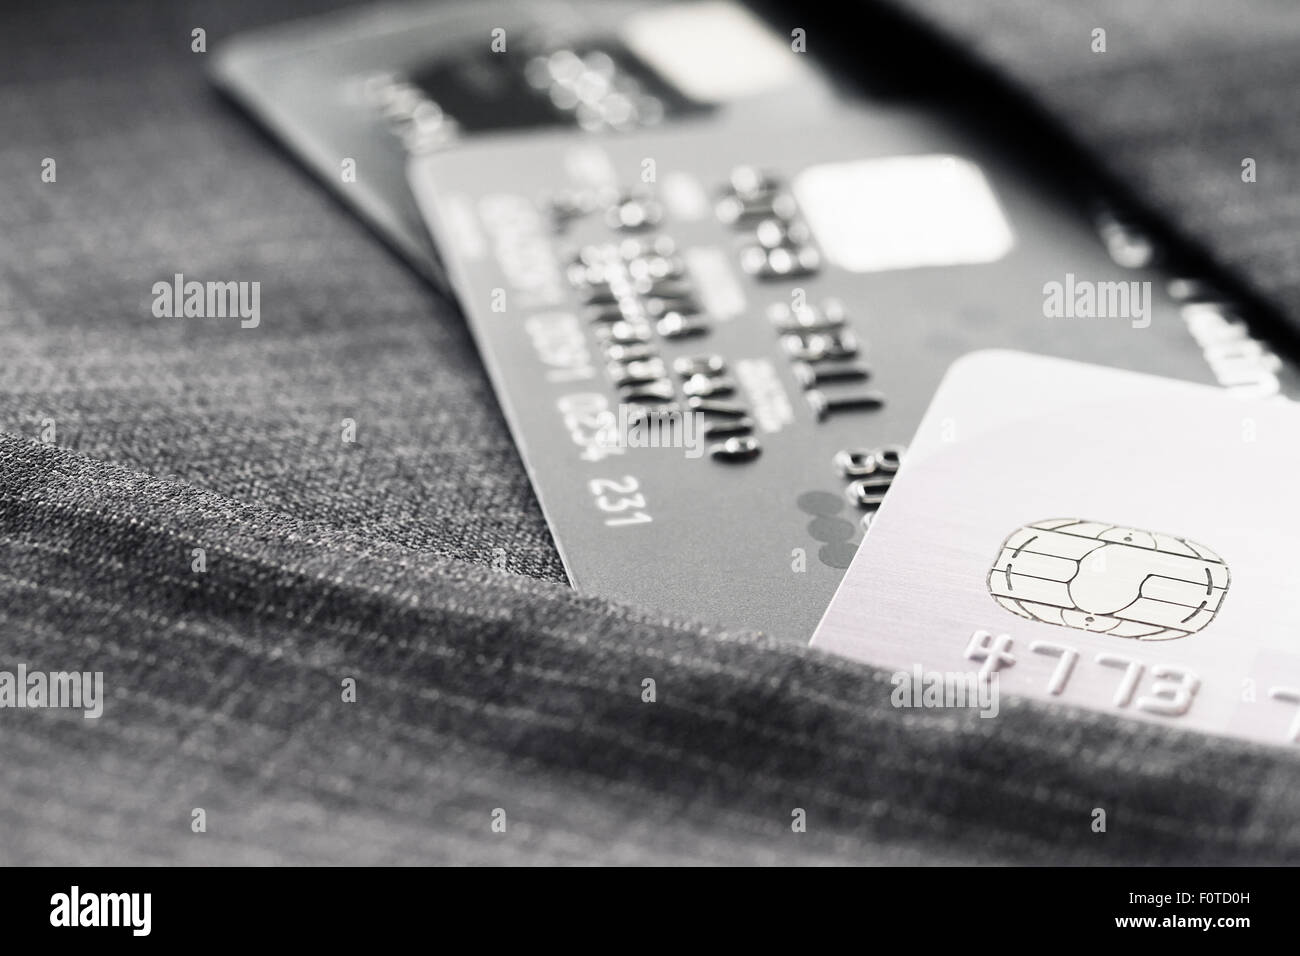 Credit Cards In Very Shallow Focus With Gray Suit Background Stock Photo Alamy